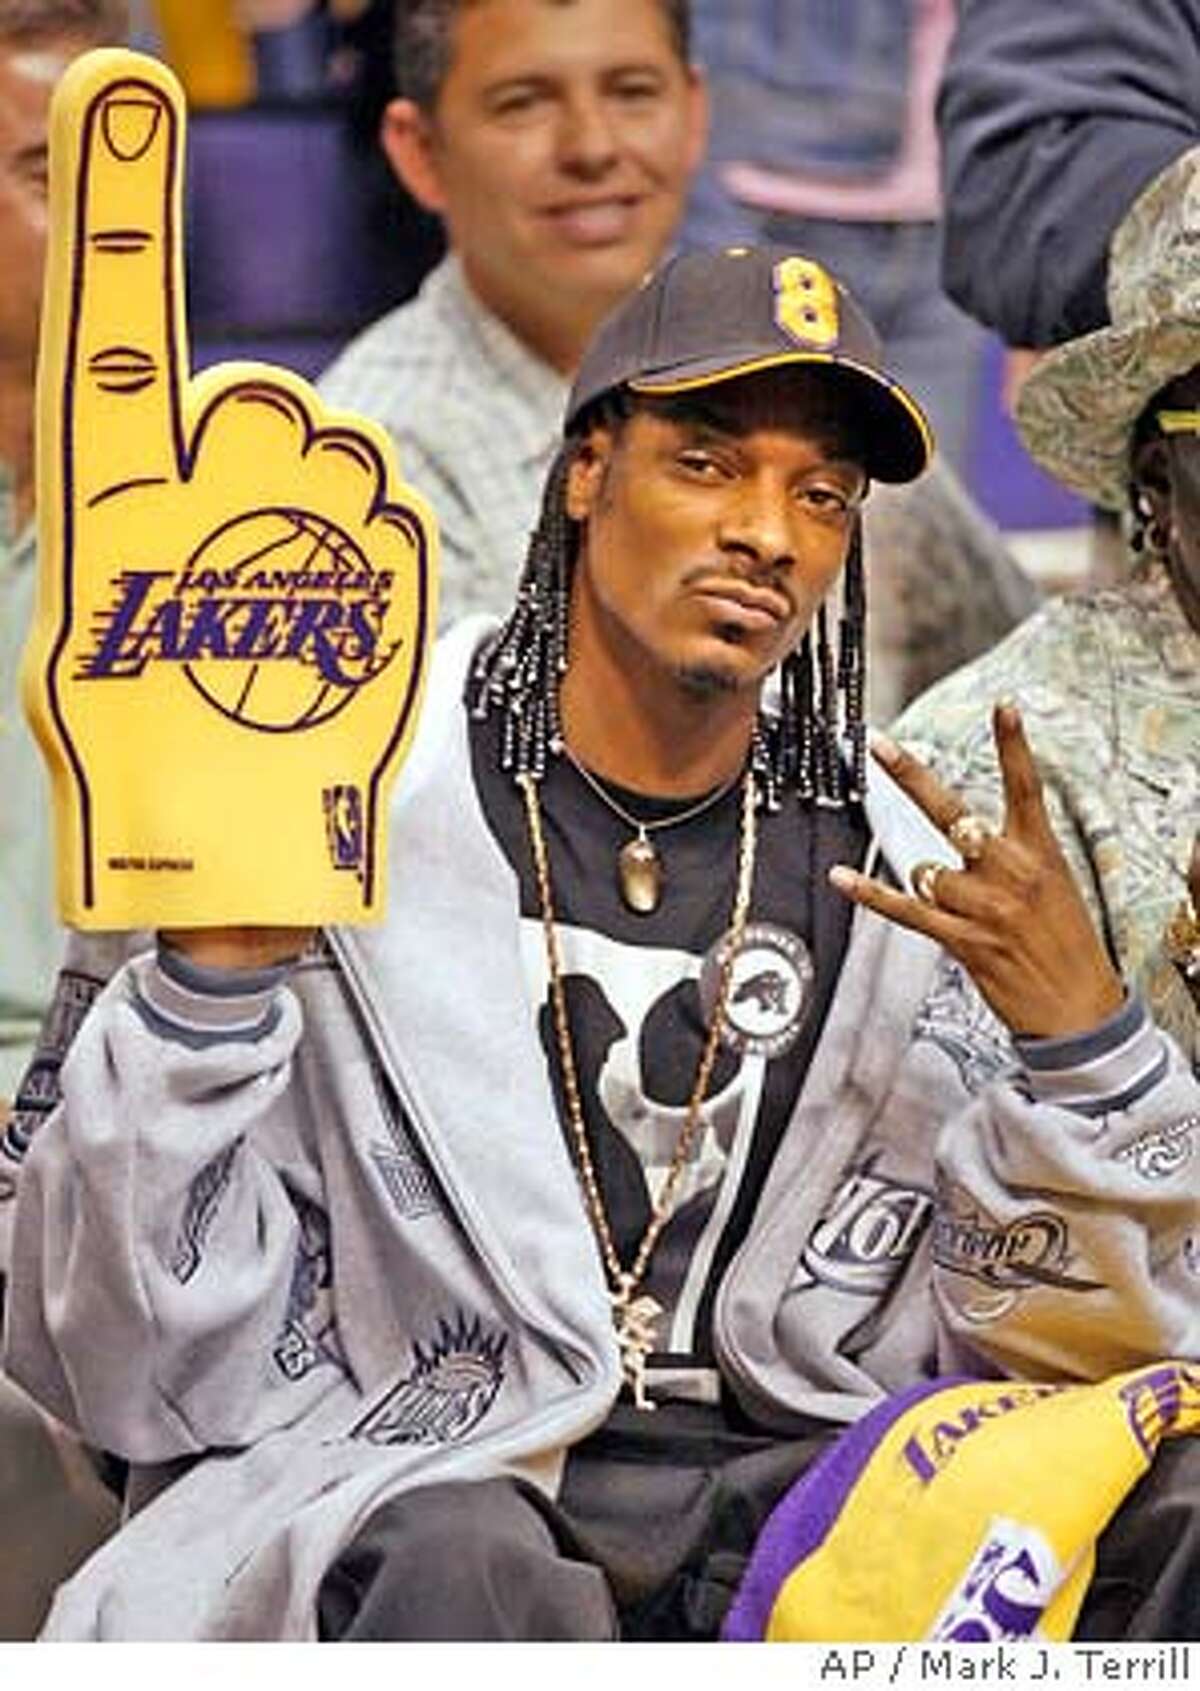 � Rapper Snoop Dogg shows his support for the Los Angeles Lakers before Game 6 of the NBA Western Conference semifinals against the San Antonio Spurs, Saturday, May 15, 2004, in Los Angeles. (AP Photo/Mark J. Terrill)